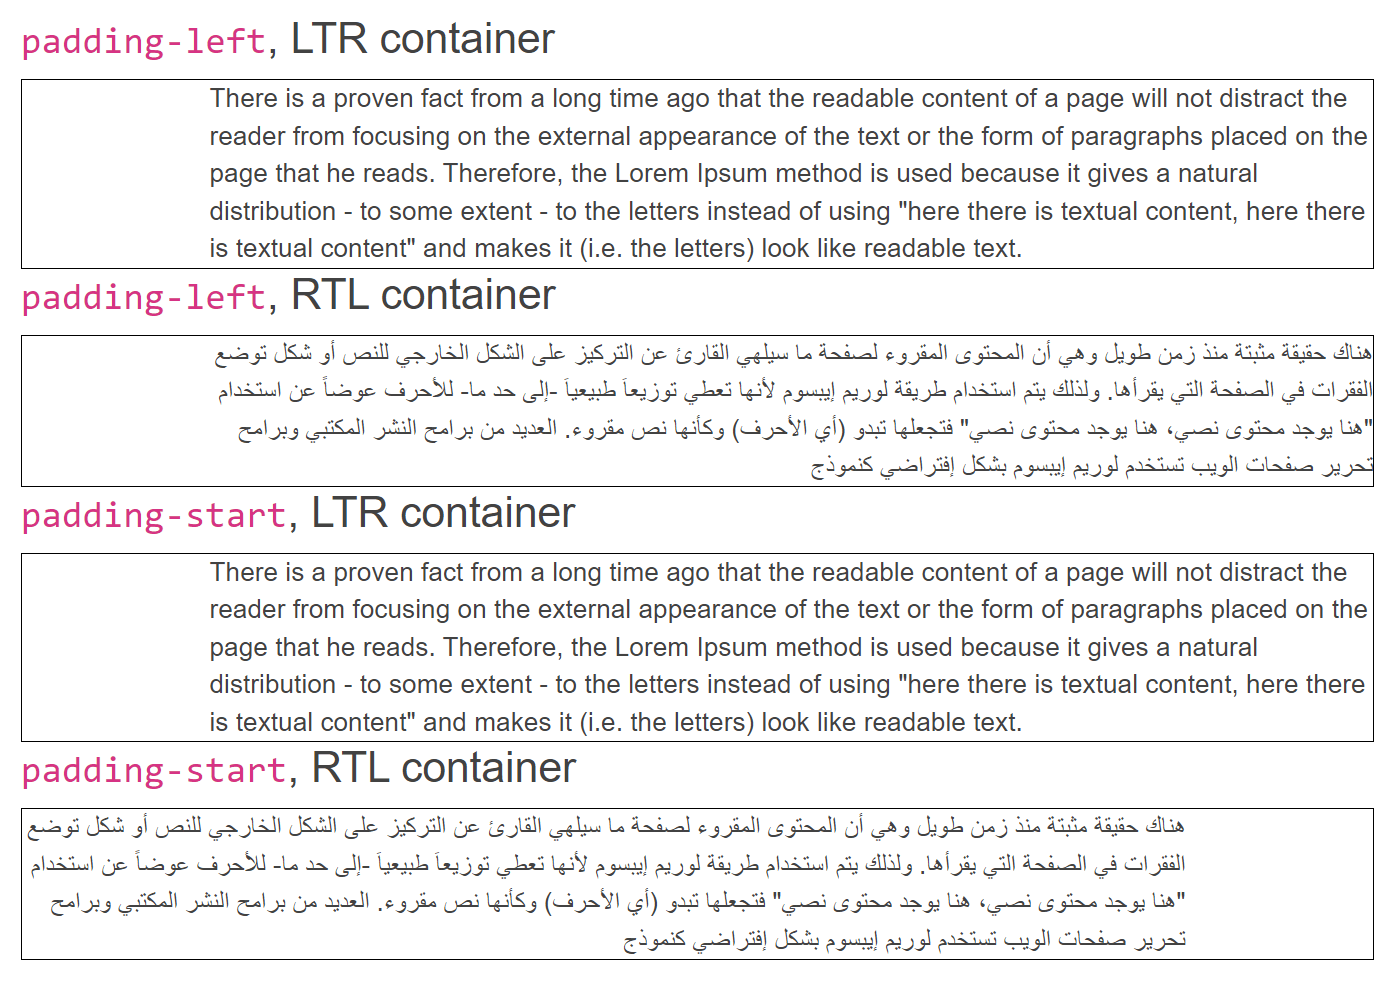 padding-left in LTR container has a wide margin on the left side, before the start of the text. padding-left in RTL container still has a wide left margin, and the start of the text on the right side bumps into the box border. Using padding-start instead has the margin on the side where the text begins - left on LTR and right on RTL